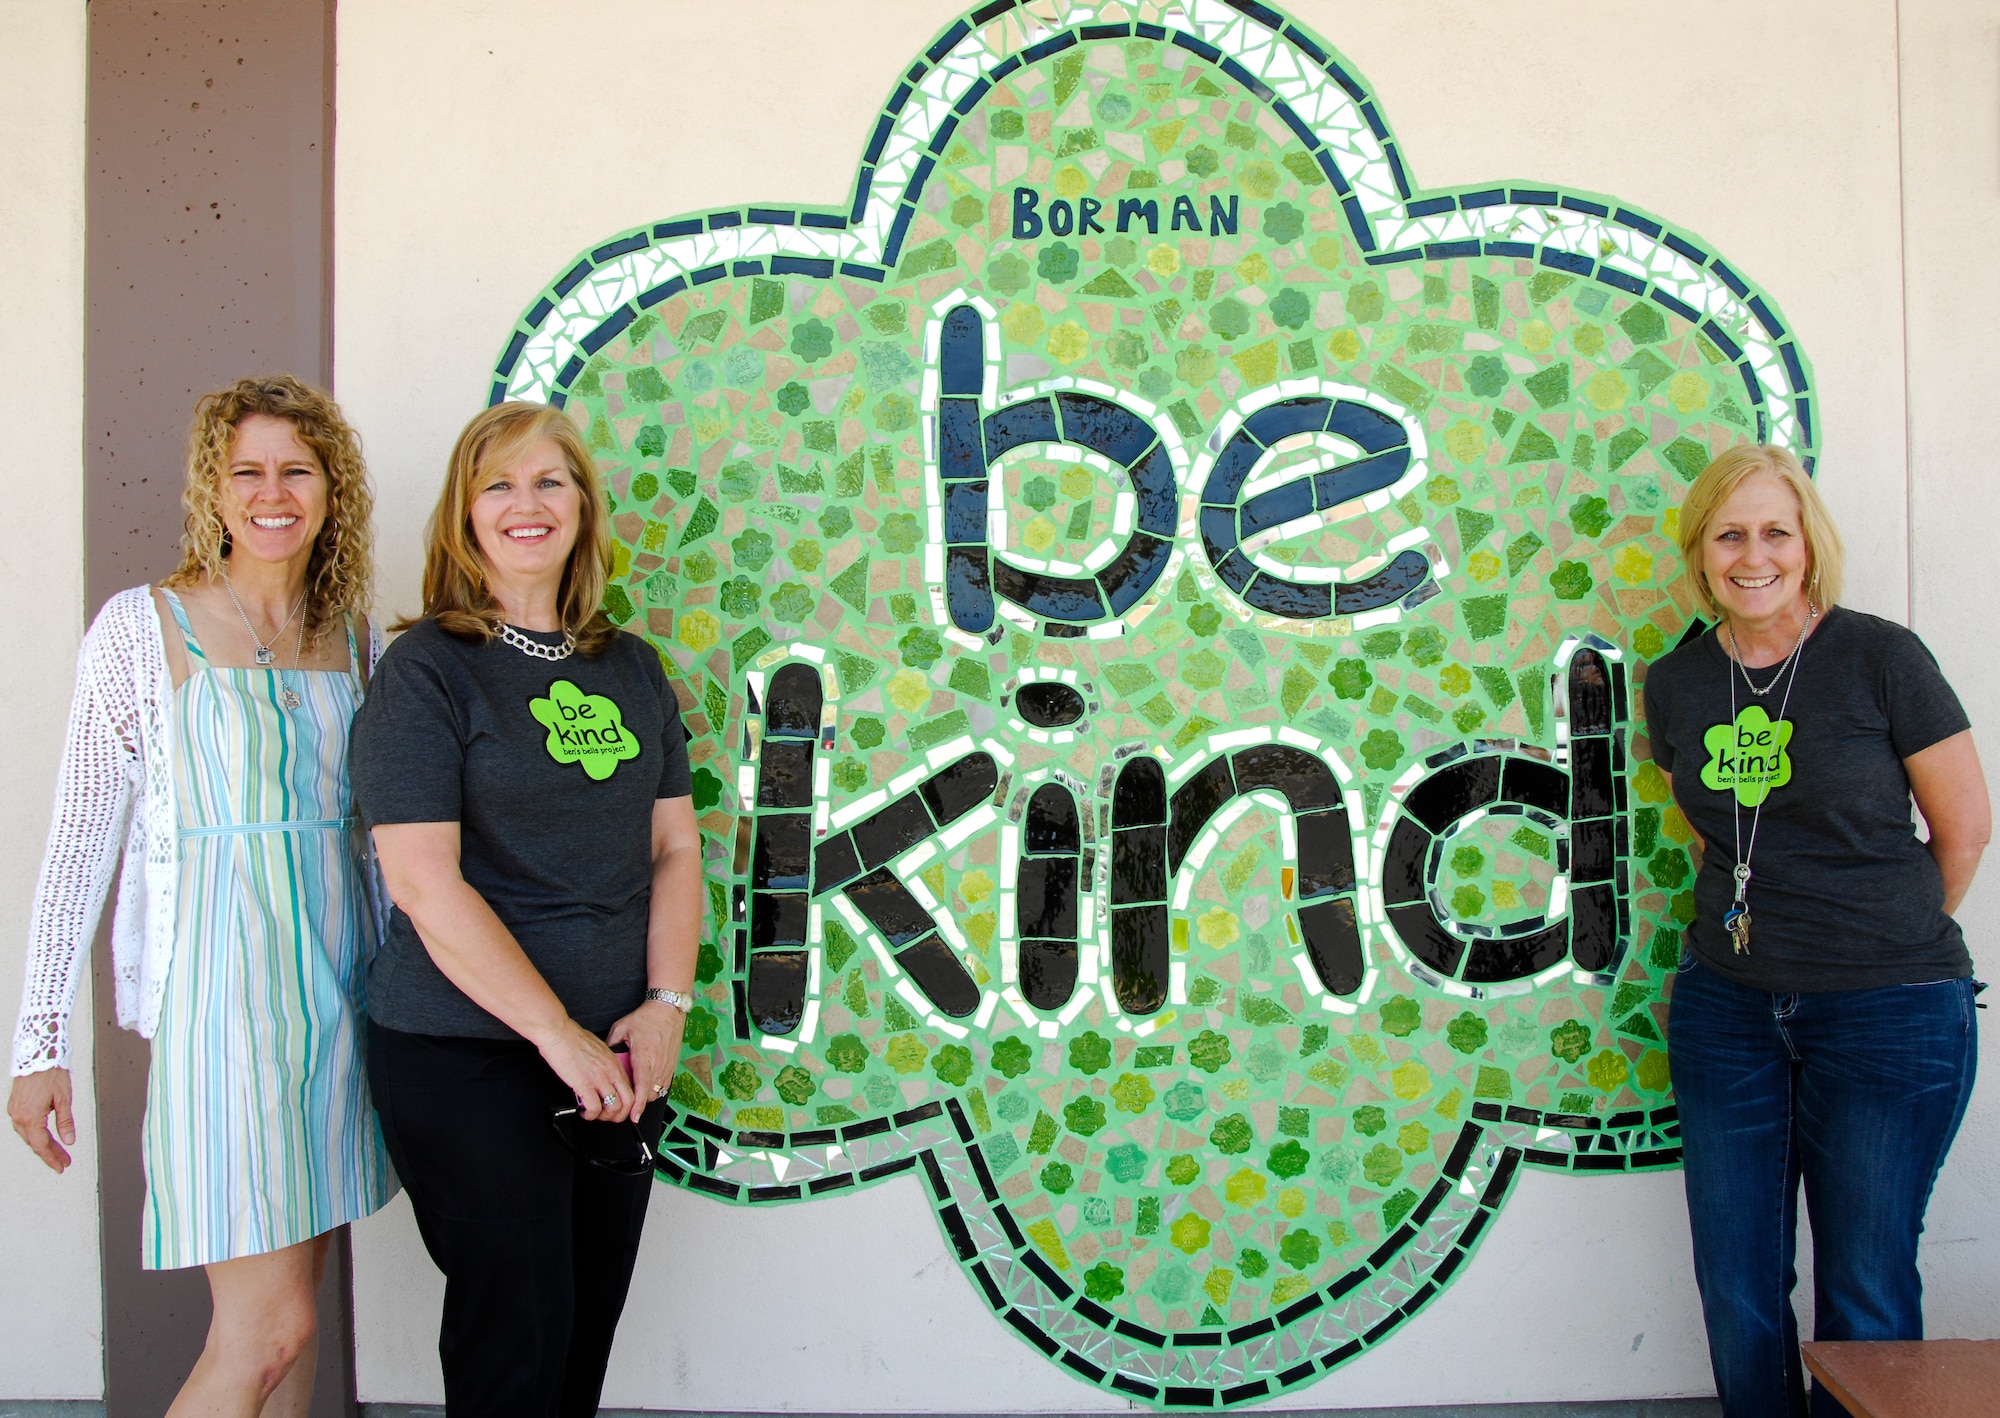 Jeannette Mare, Ben’s Bells Project founder, Martha Damek, Frank Borman Elementary student counselor and Kathy Sisler, Frank Borman Elementary principal, stand in front of the “be kind” mural inside the school at Davis-Monthan Air Force Base, Ariz., May 21, 2014. The mural was created by the Ben’s Bells Project for the school’s participation in the Ben's Bells Kindness Education Programs. (U.S. Air Force photo by Staff Sgt. Angela Ruiz/Released)